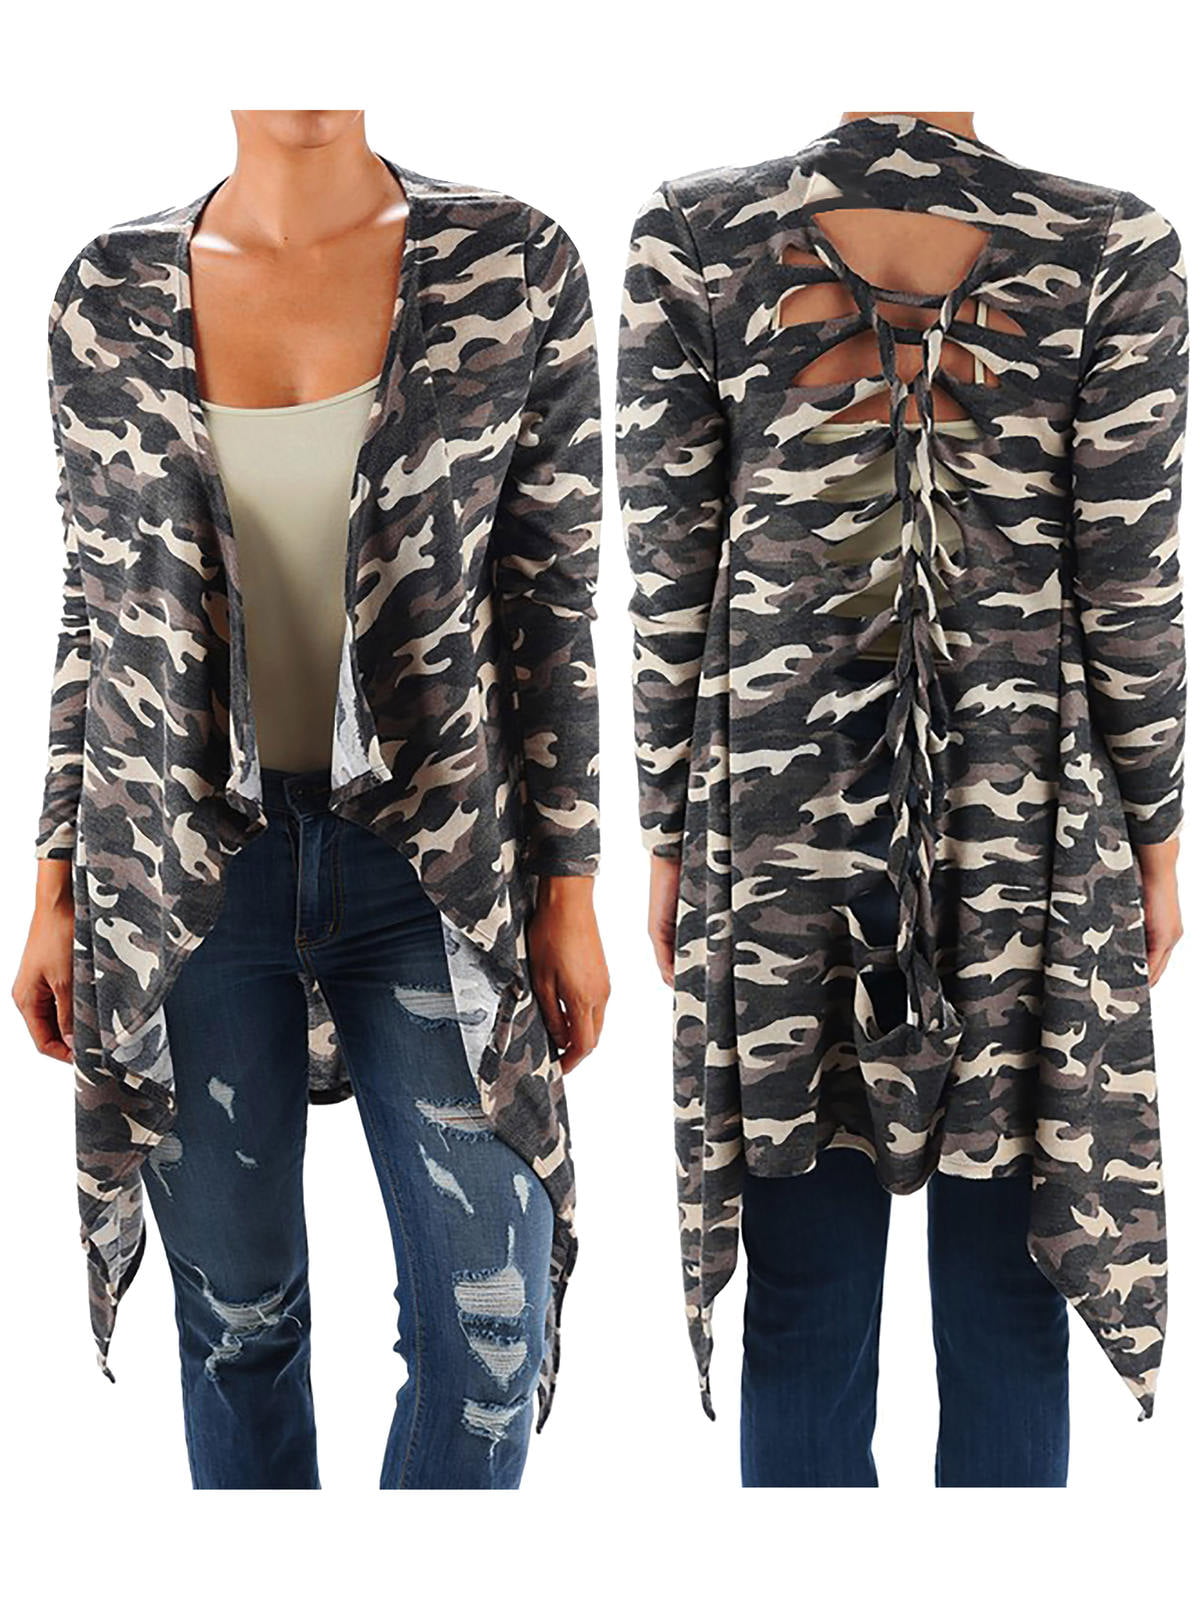 HOOUDO Cardigans for Women Camouflage Printed Long Sleeve Open Front Trench Lightweight Long Cardigan Jacket Coat with Pockets Plus Size